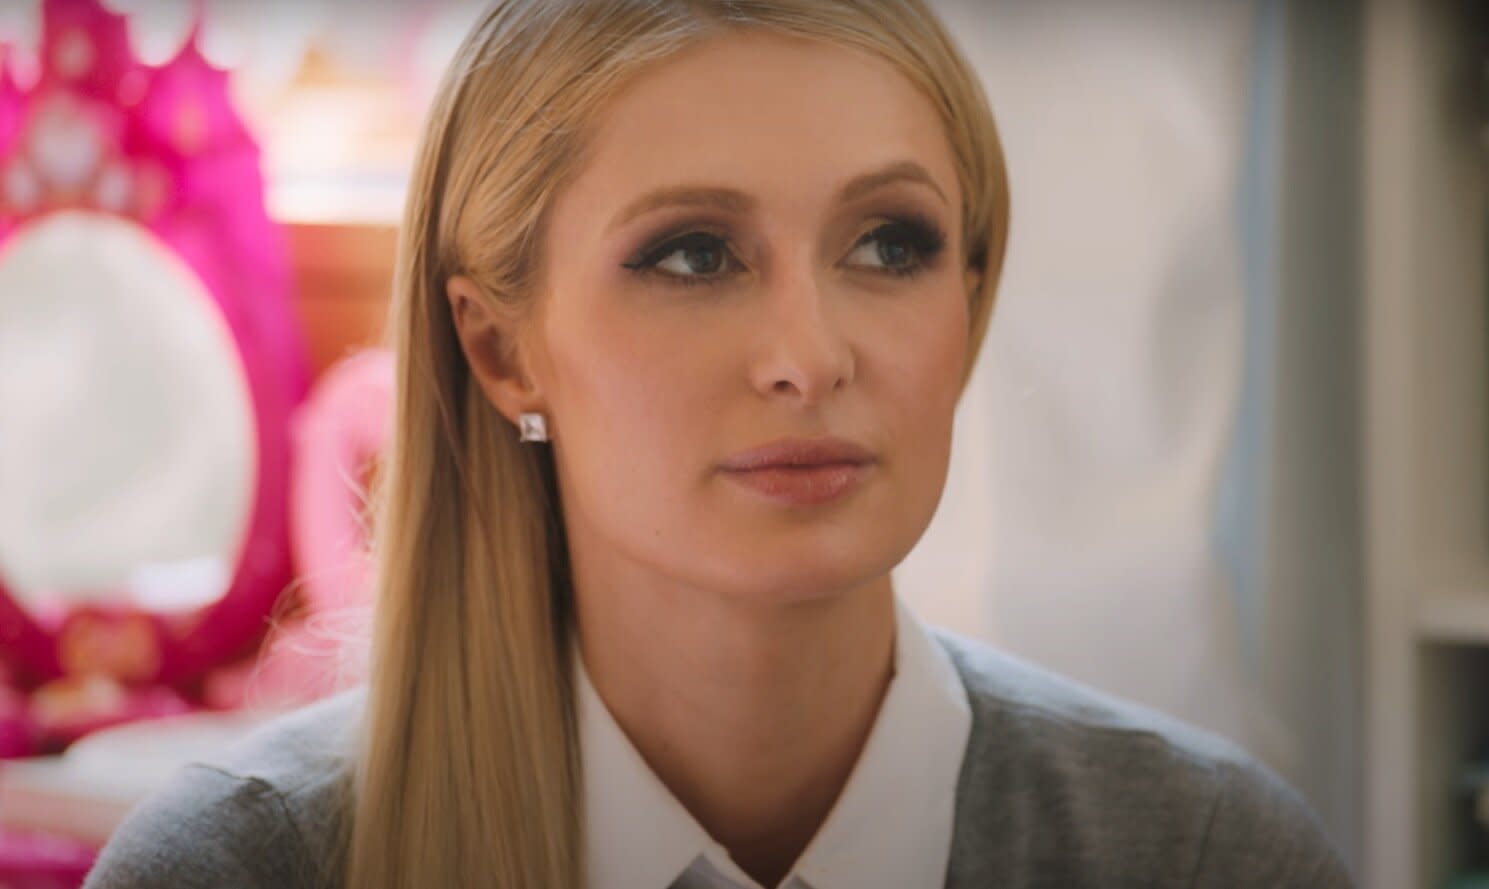 Paris Hilton Is Speaking Out About Physical Abuse At Her Boarding School